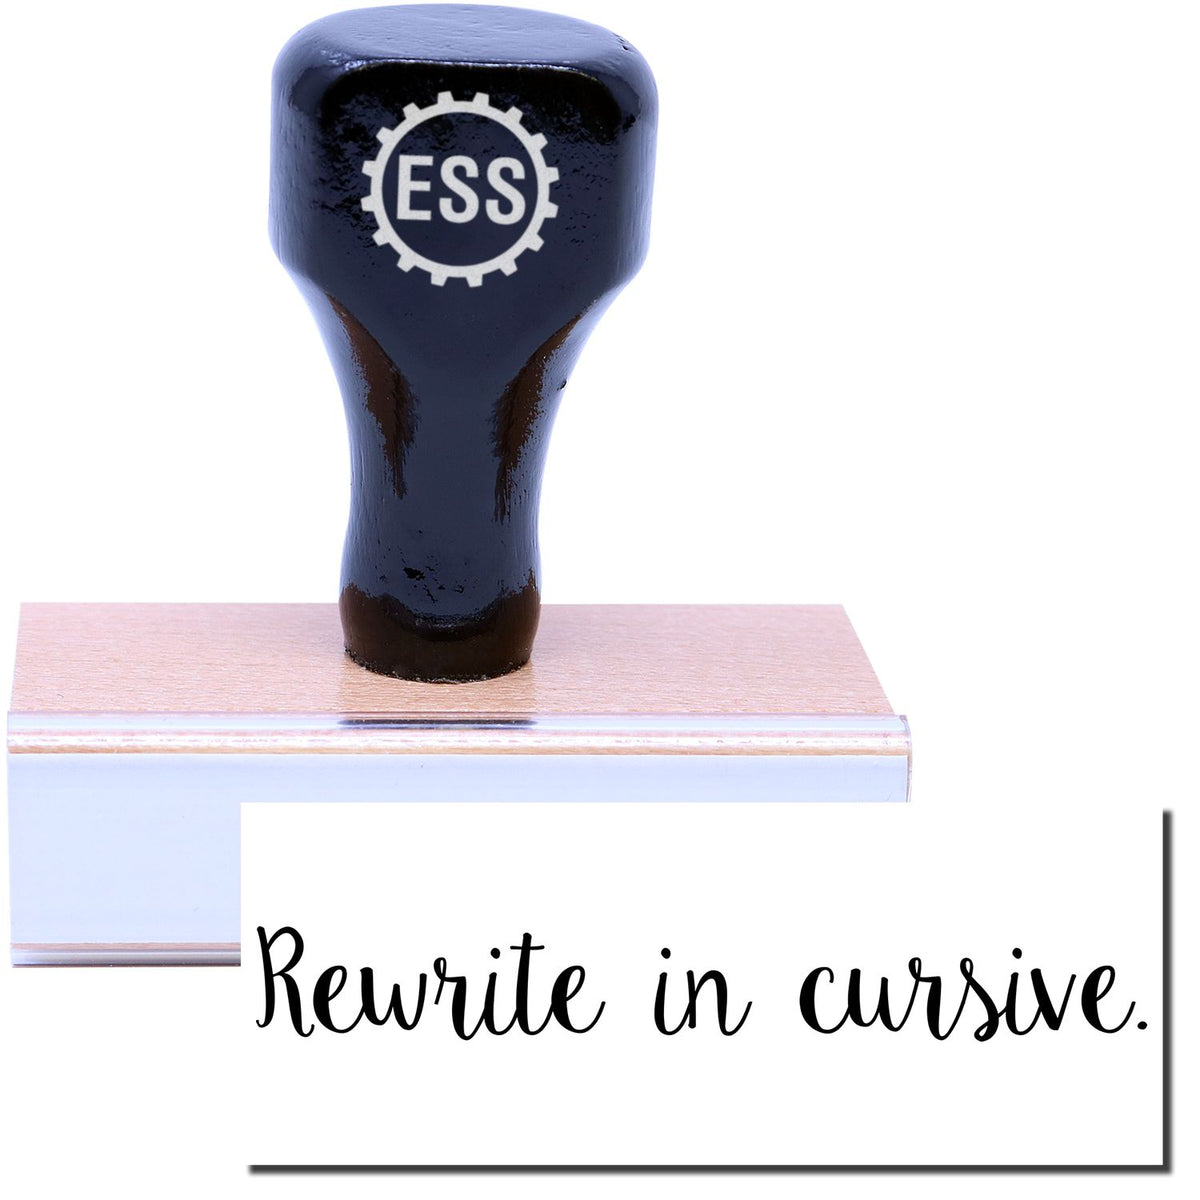 A stock office rubber stamp with a stamped image showing how the text &quot;Rewrite in cursive.&quot; in a large script cursive font is displayed after stamping.